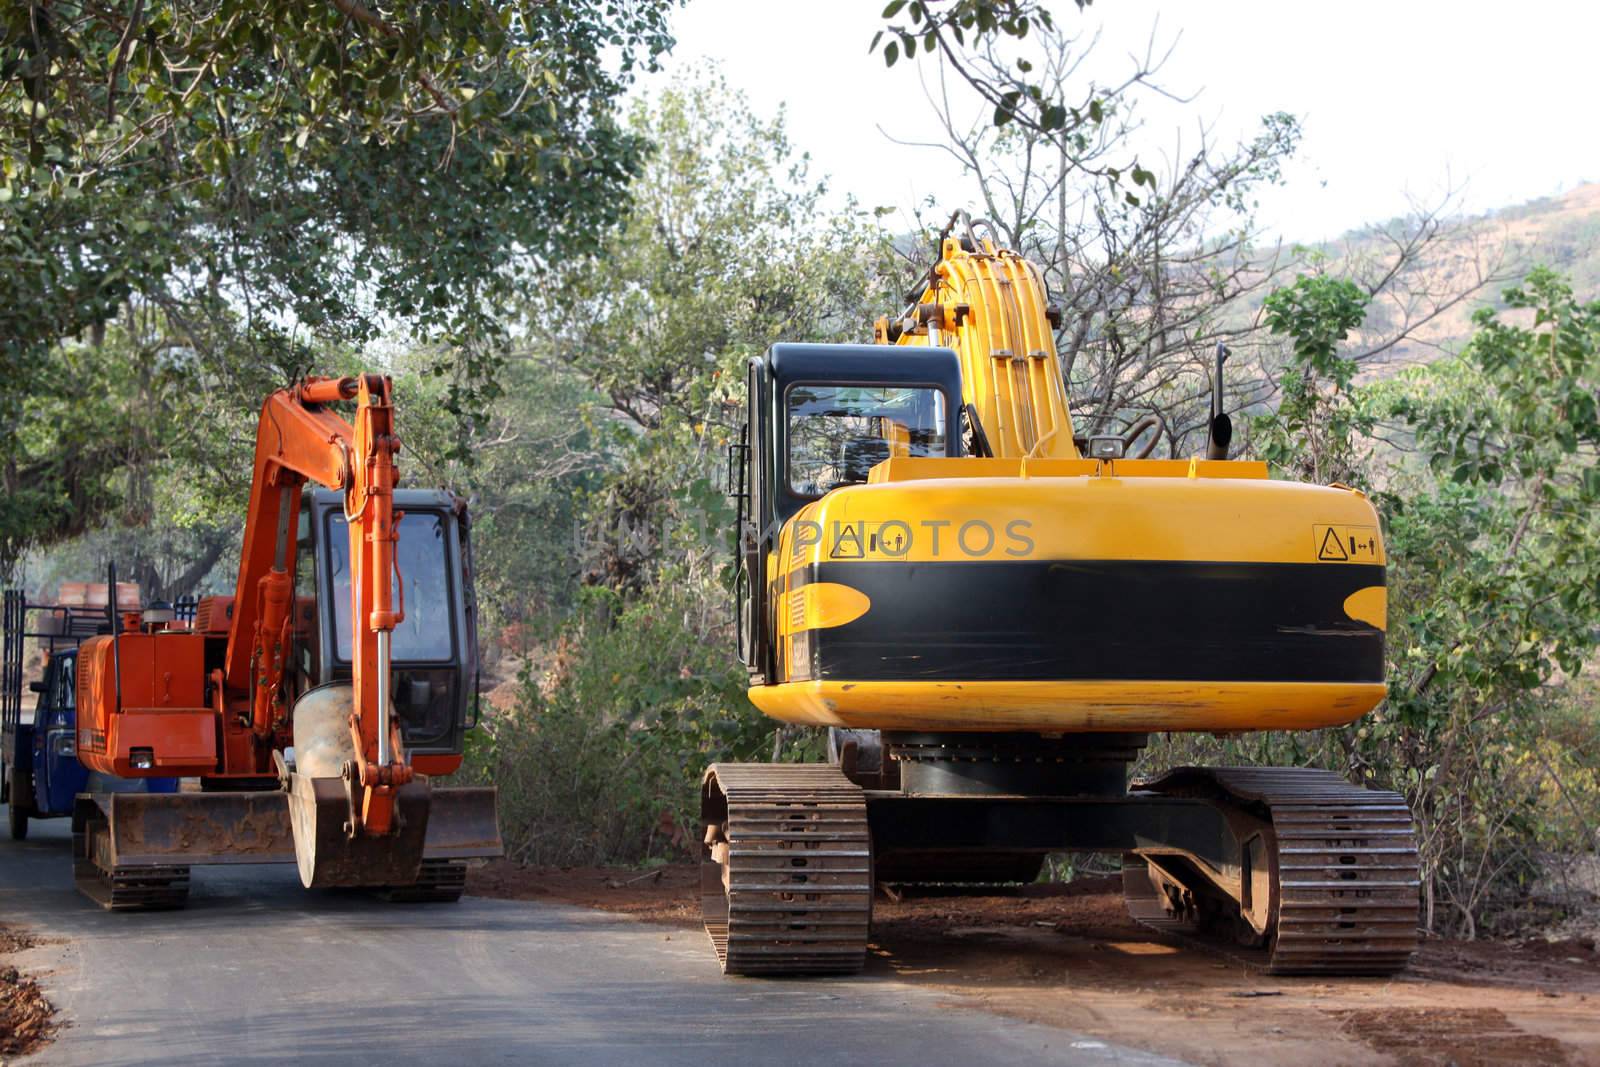 Dozers working at a road construction site, in India.